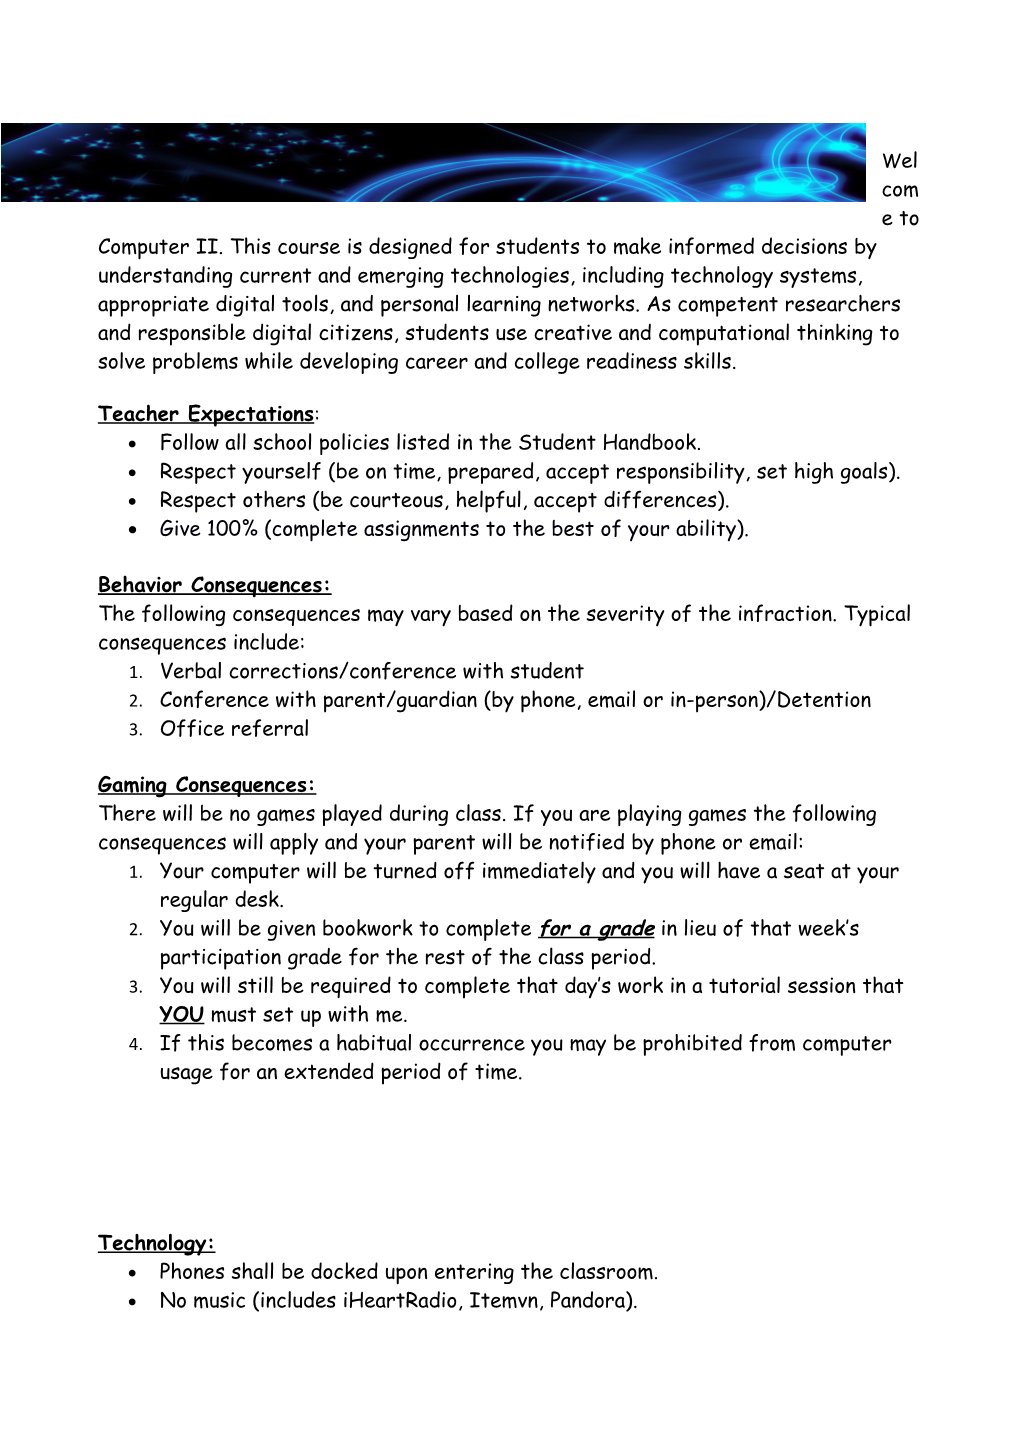 Follow All School Policies Listed in the Student Handbook